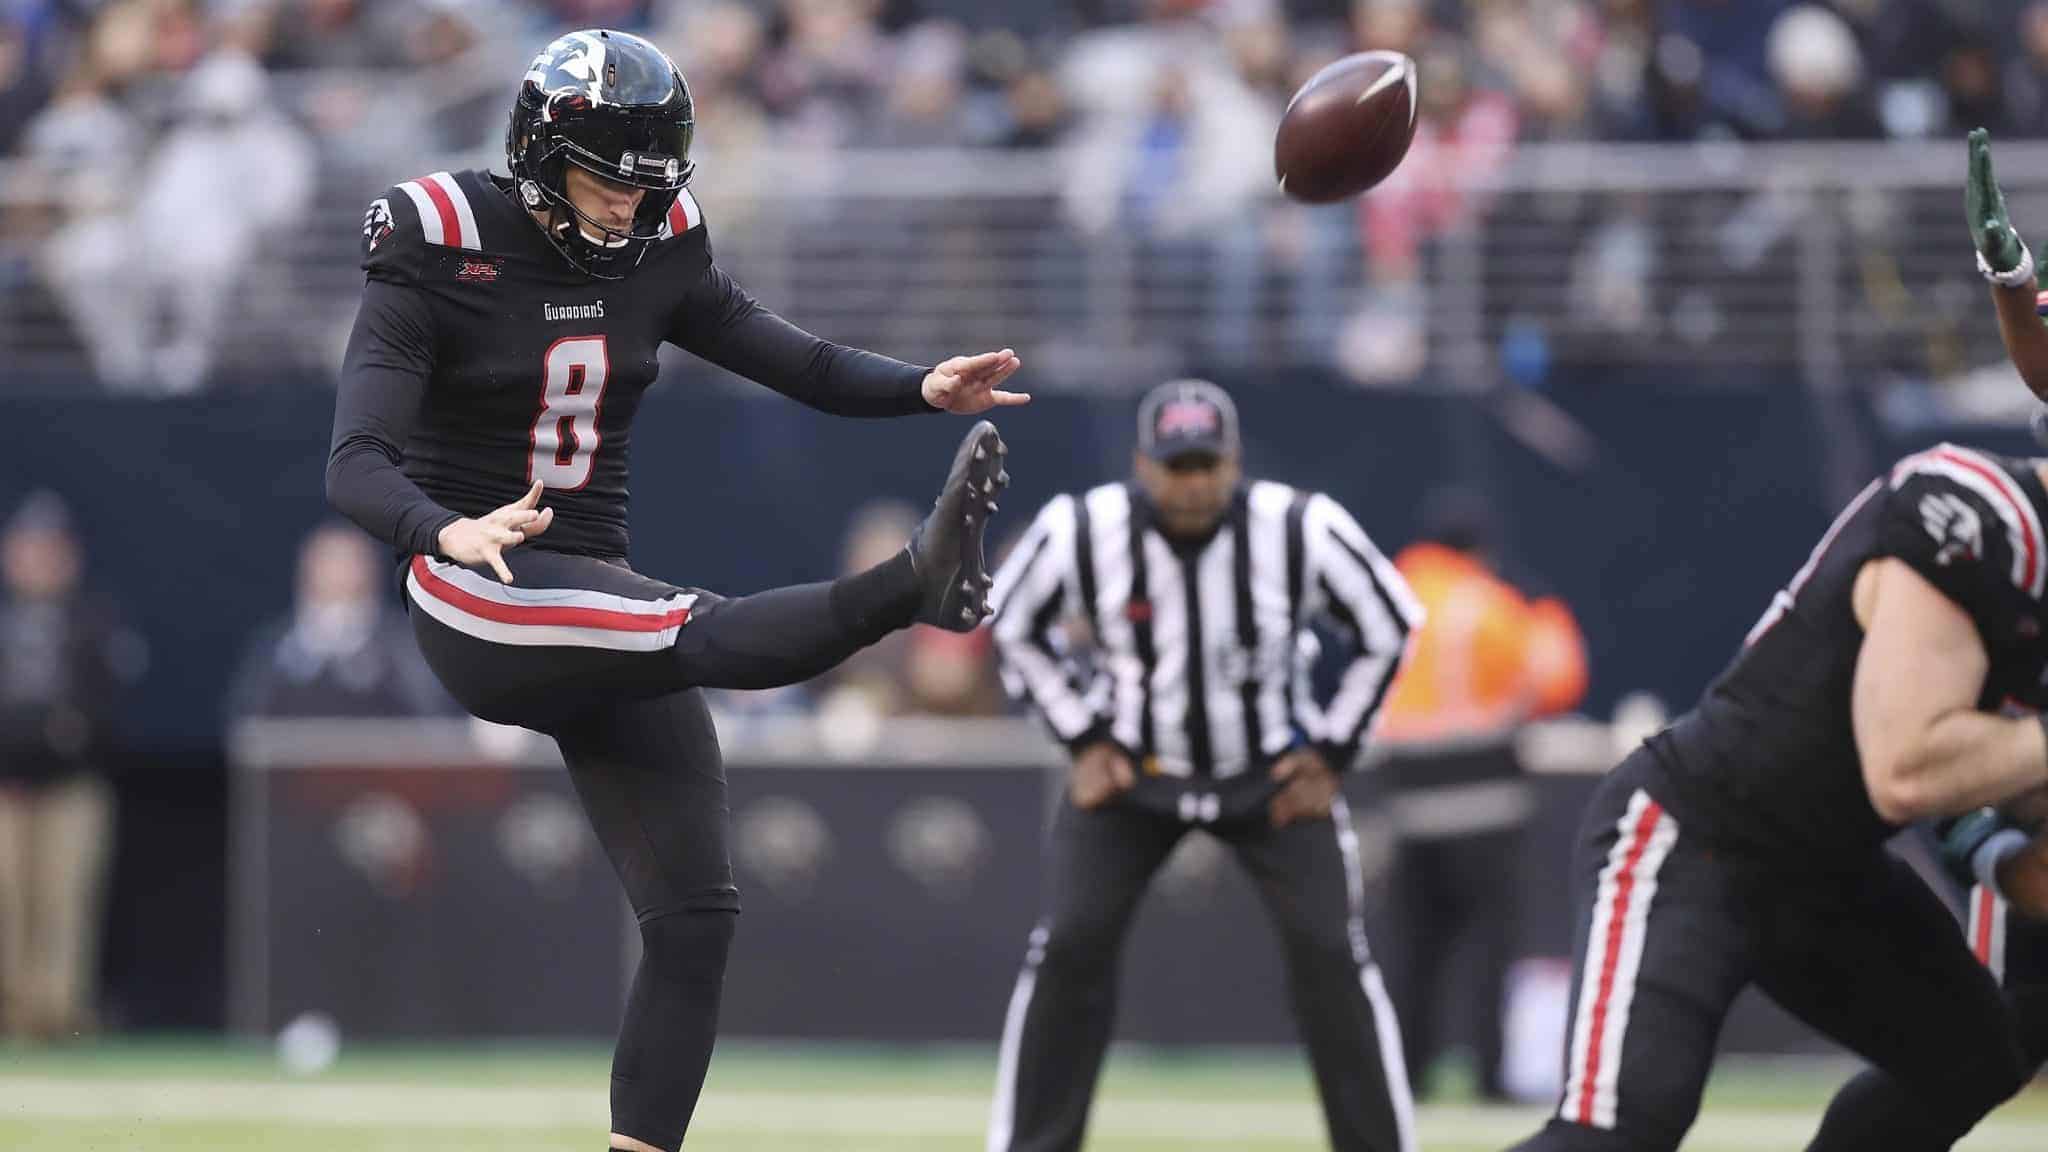 New York Guardians punter Justin Vogel (8) punts the ball away during an XFL football game against the Tampa Bay Vipers, Sunday, Feb. 9, 2020, in East Rutherford, N.J. The New York Guardians won 23-3.